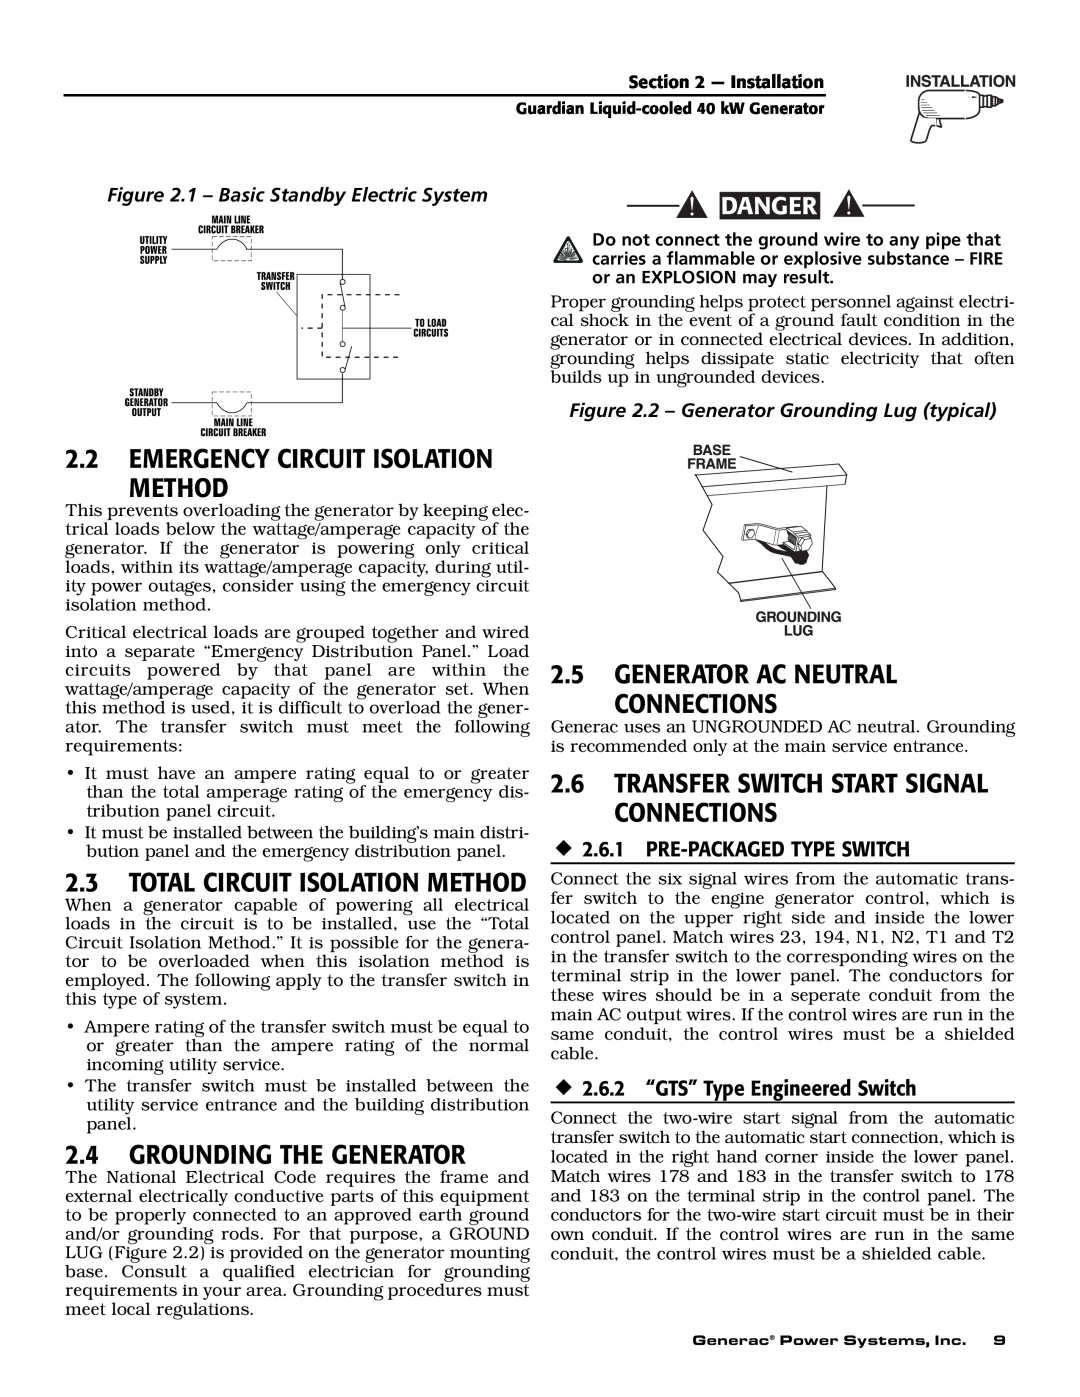 Generac Power Systems 46262 Method, Grounding The Generator, Generator Ac Neutral Connections, Emergency Circuit Isolation 